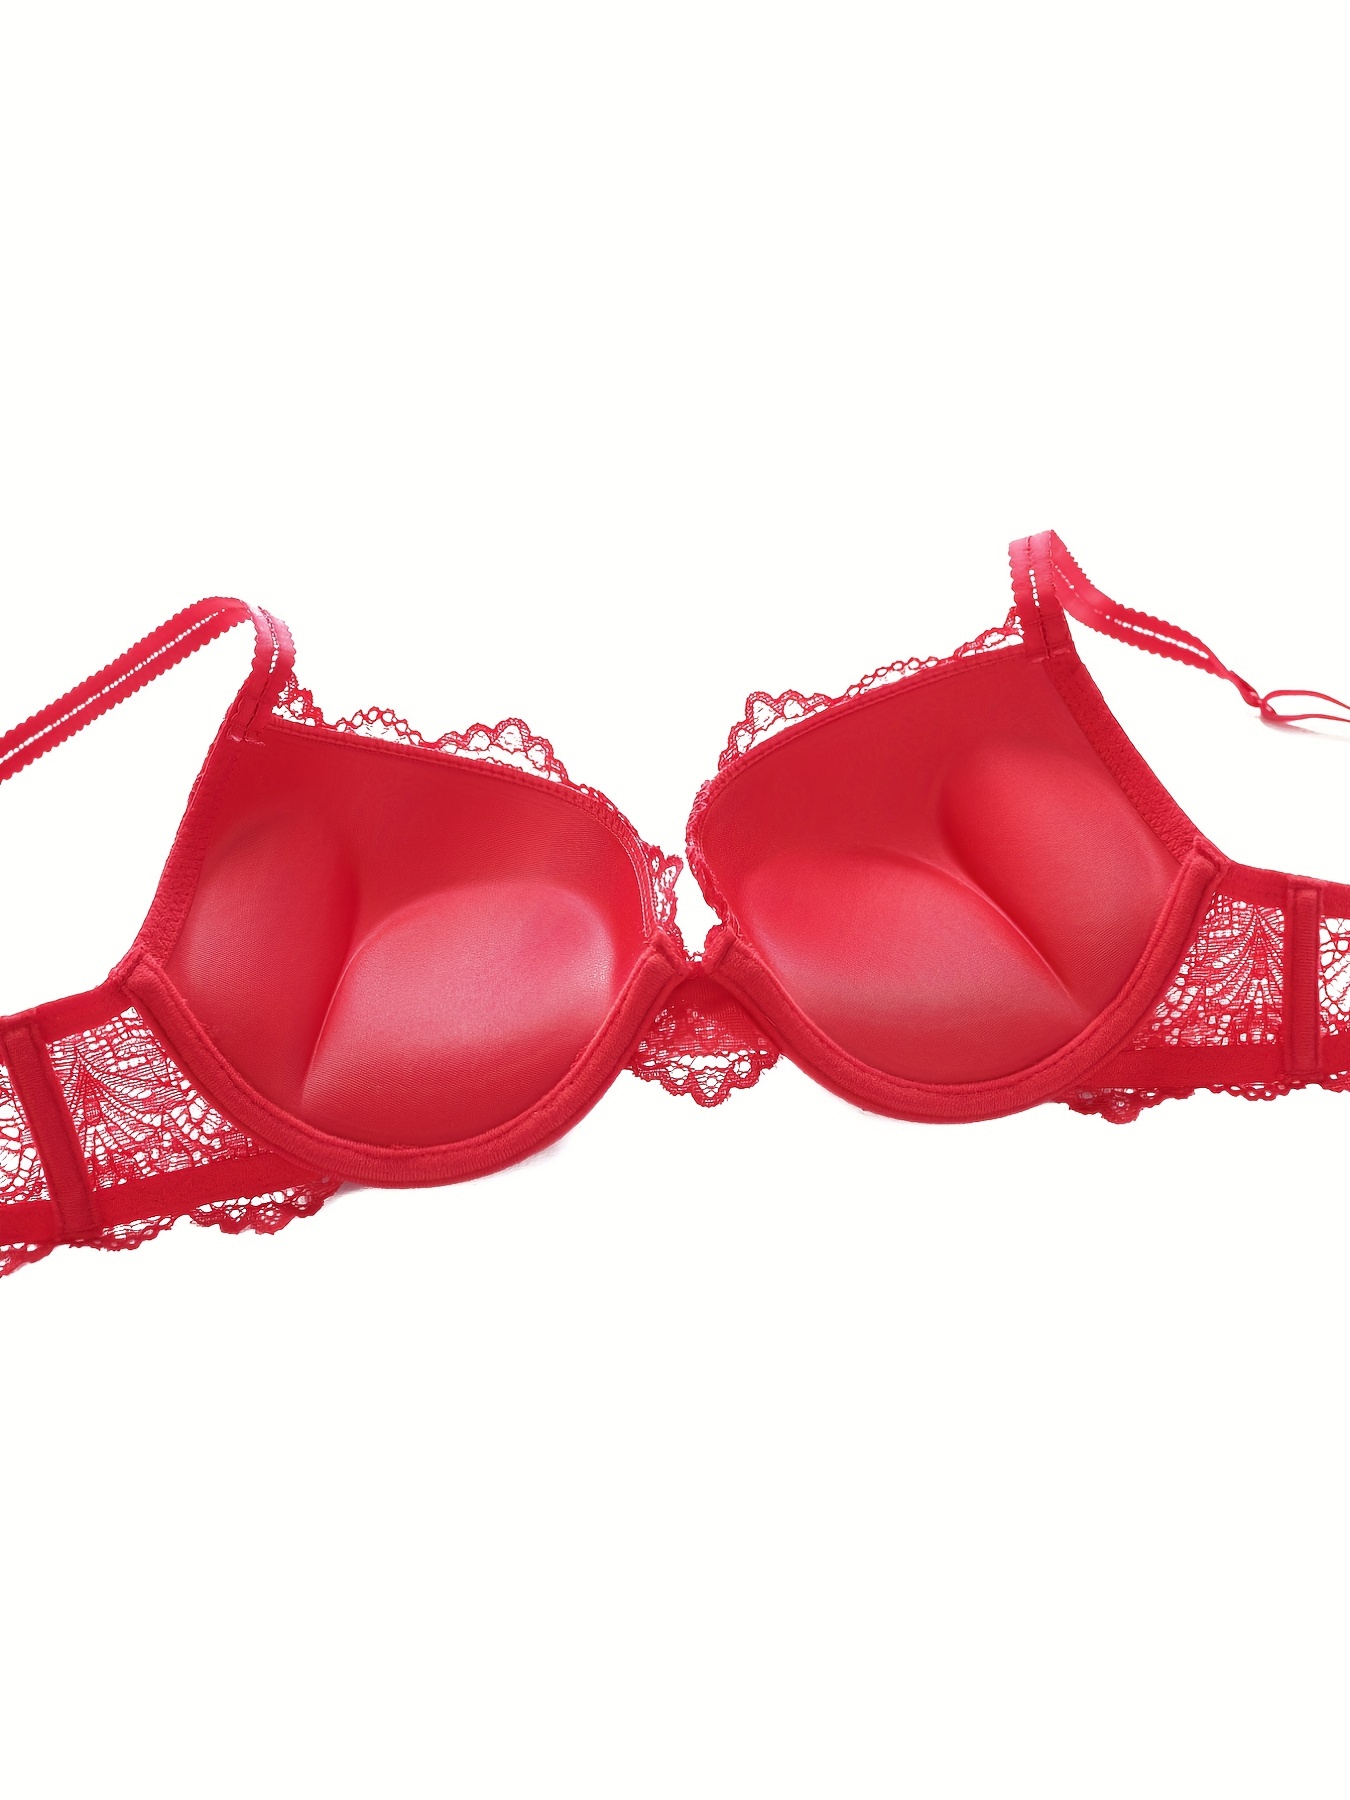 Victoria's Secret Very Sexy Push Up Bra Red Lace with Bow 32A 